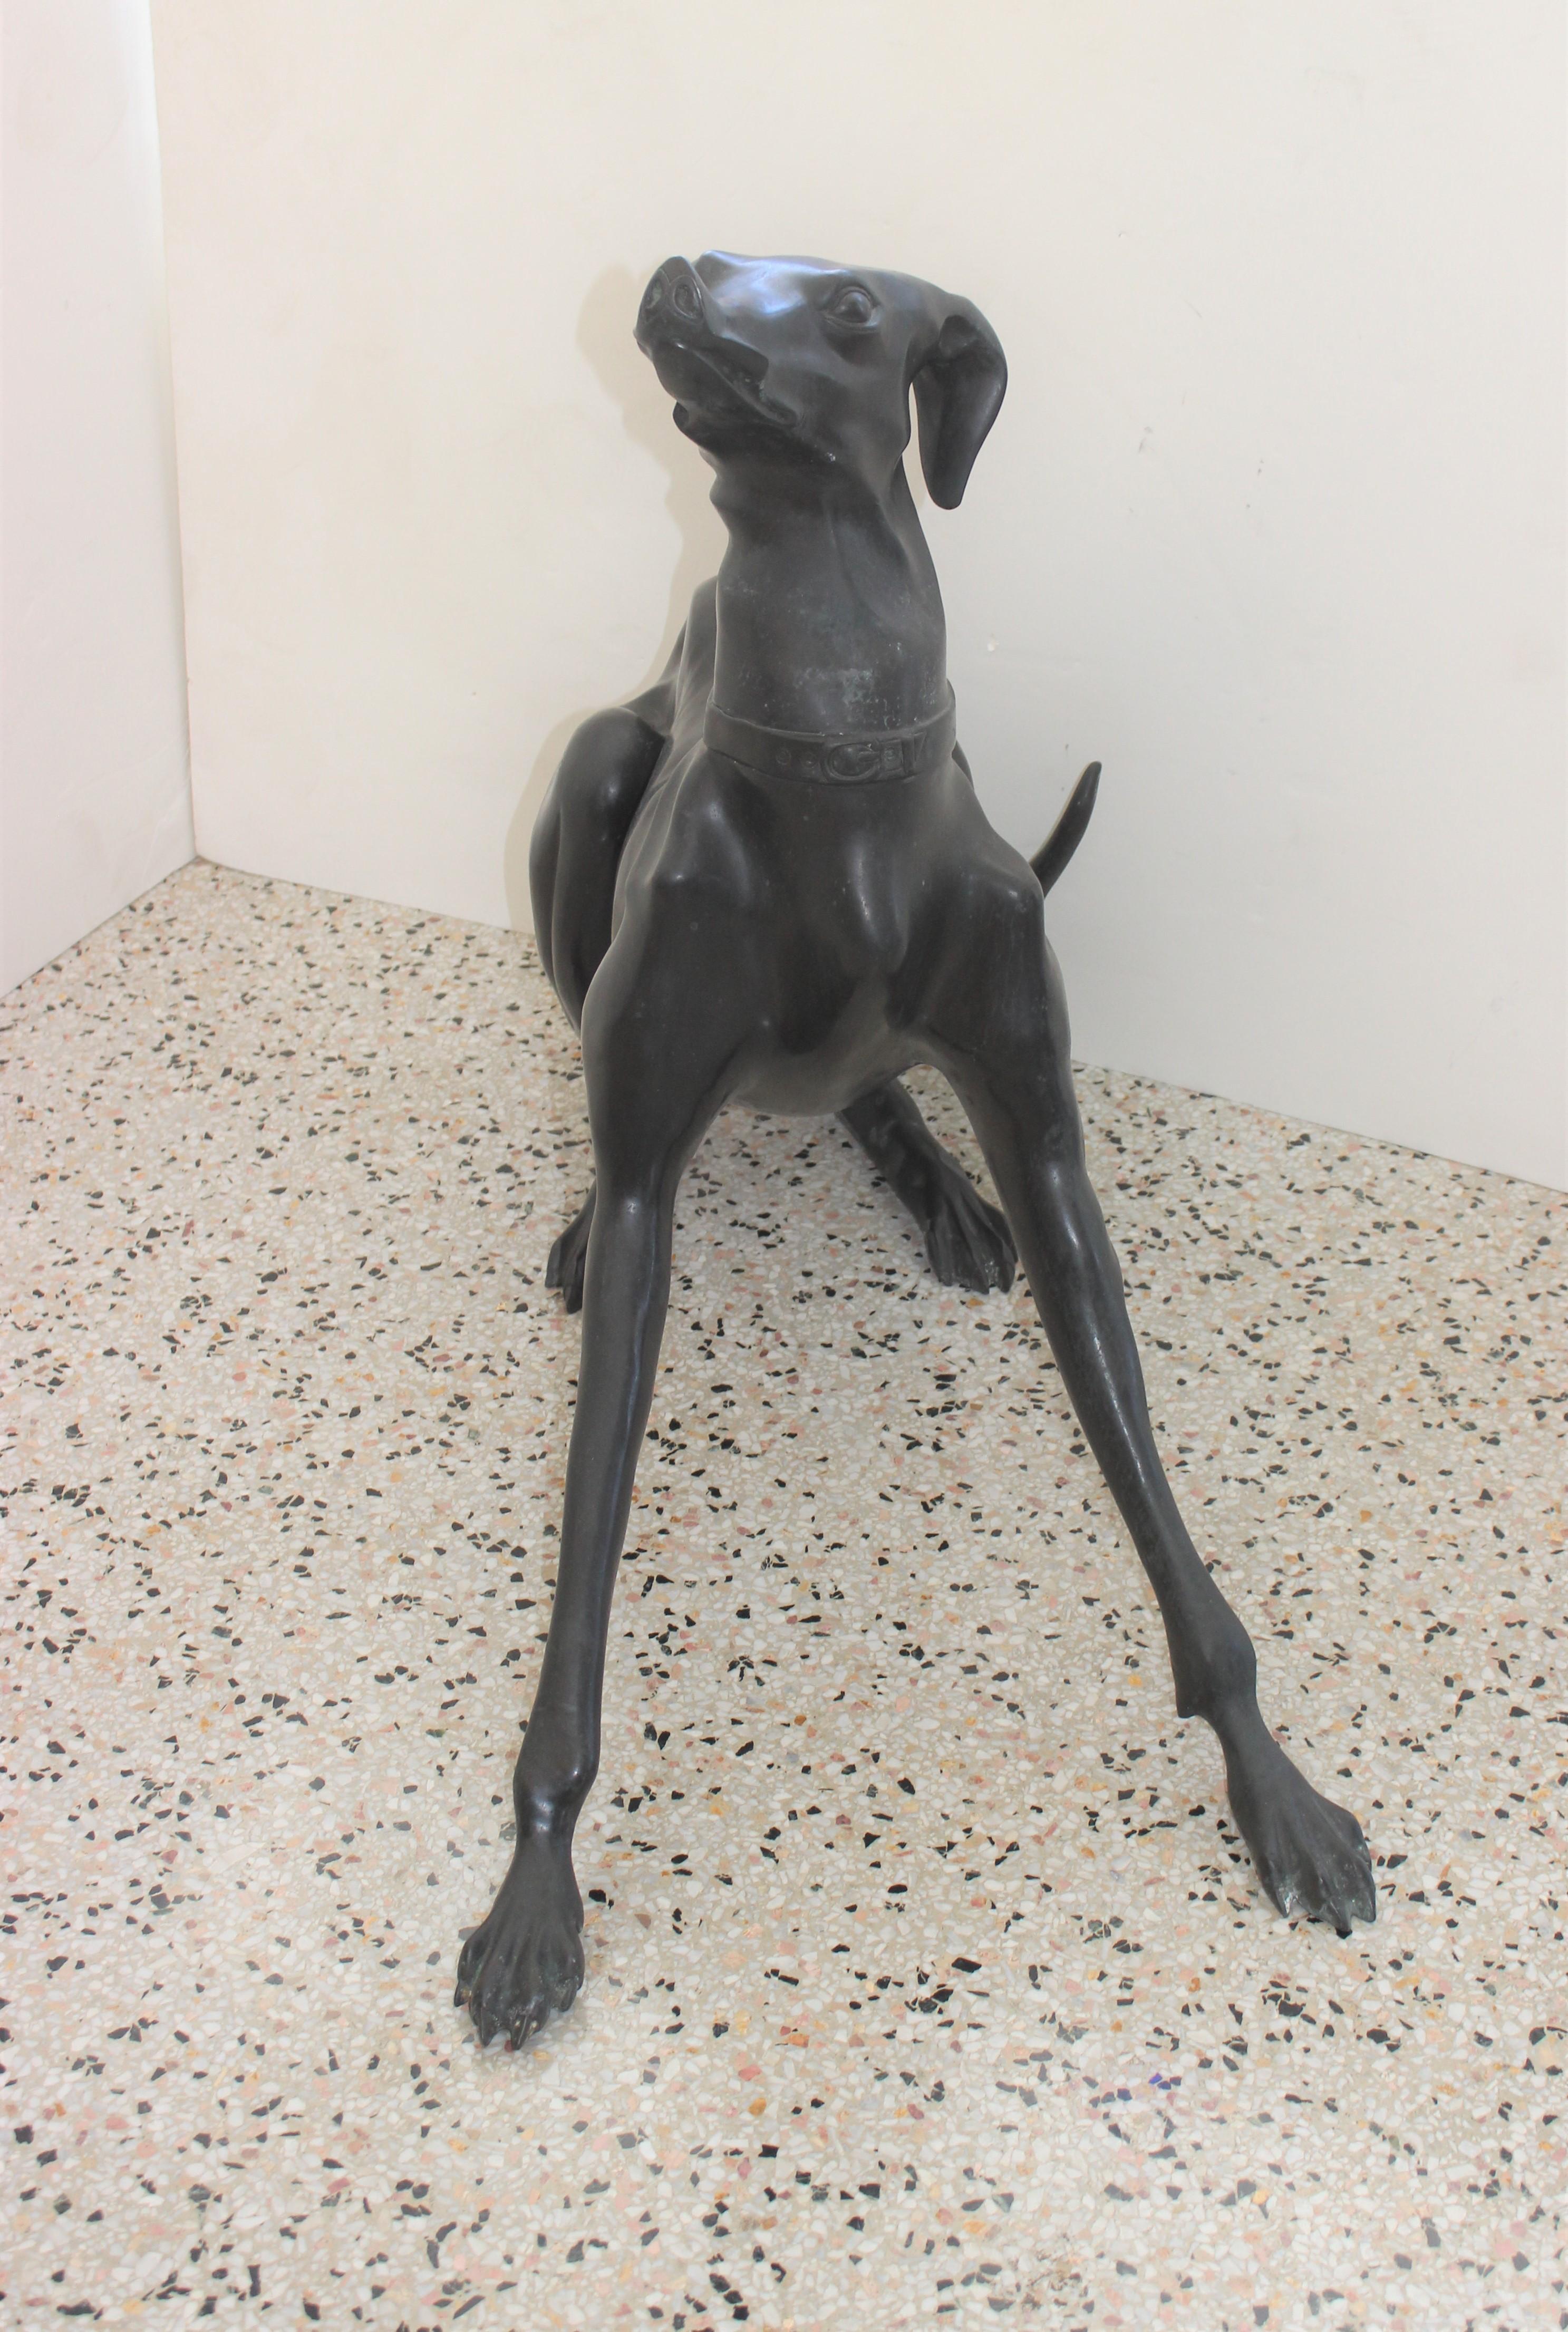 Bronze Italian Greyhound sculpture - indoor or outdoor - large size from a Palm Beach estate. Measures: 31